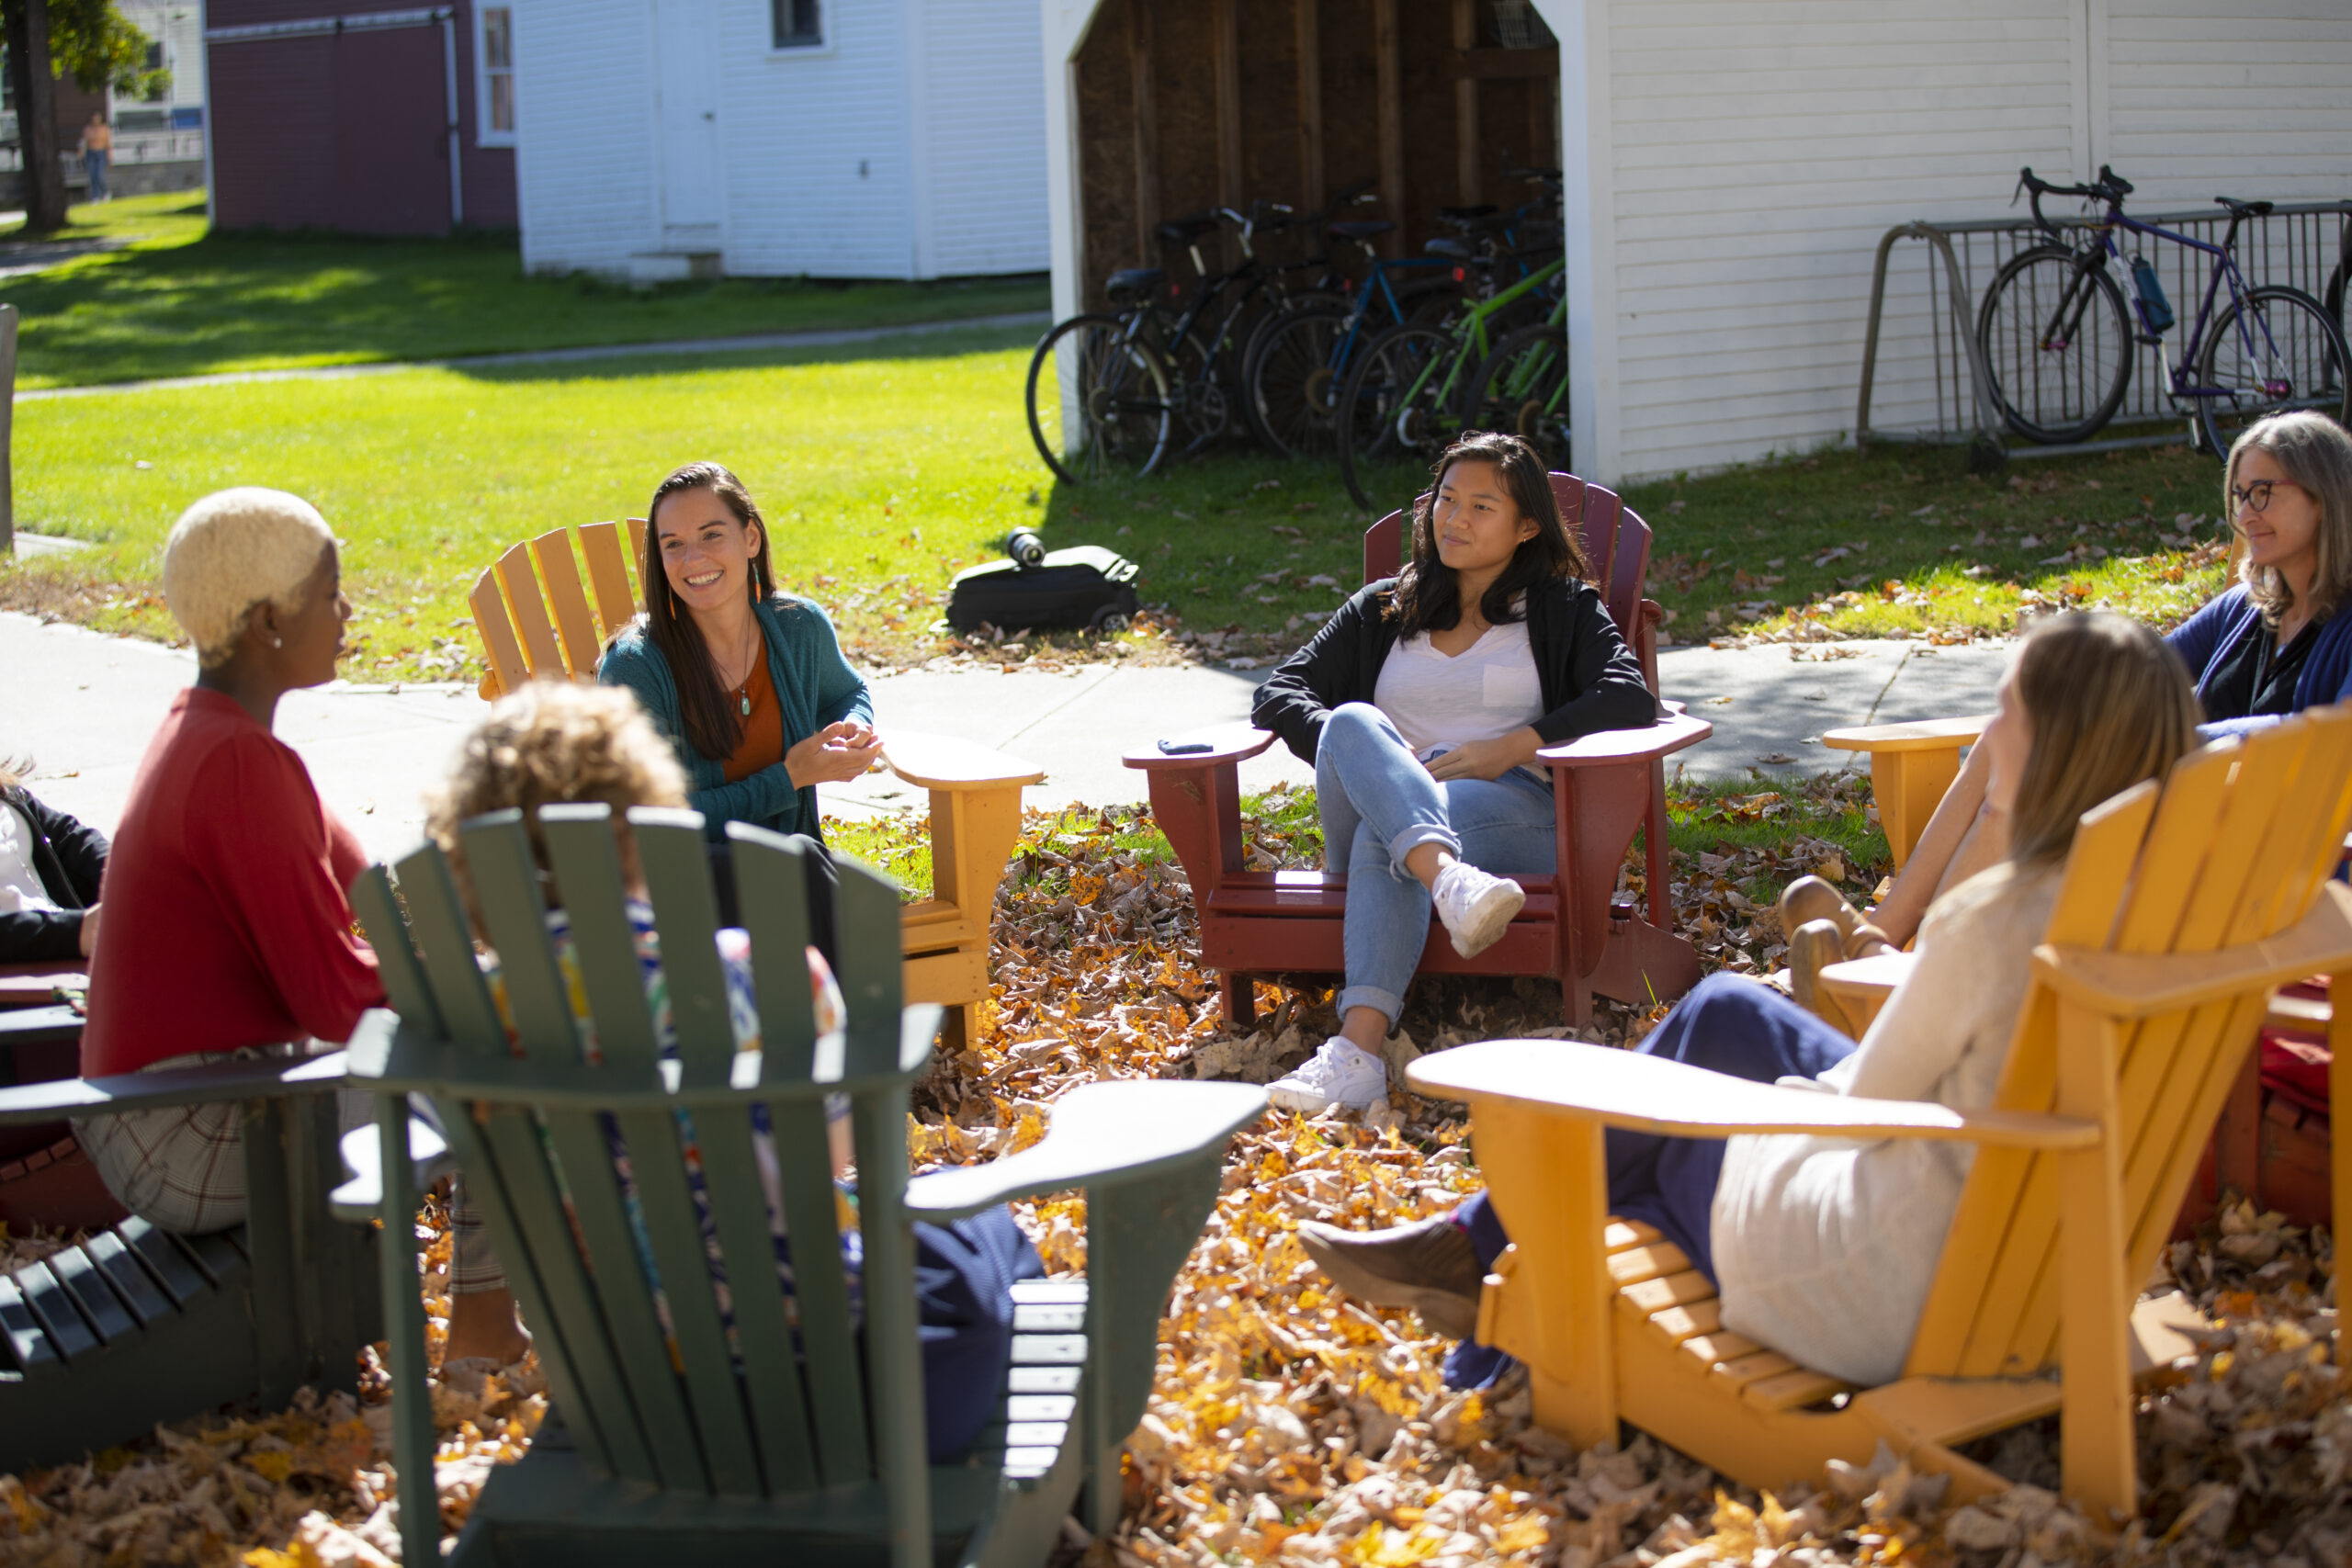 Decorative: a diverse group of six smiling people sitting outside in a circle of multicolored wooden lawn chairs